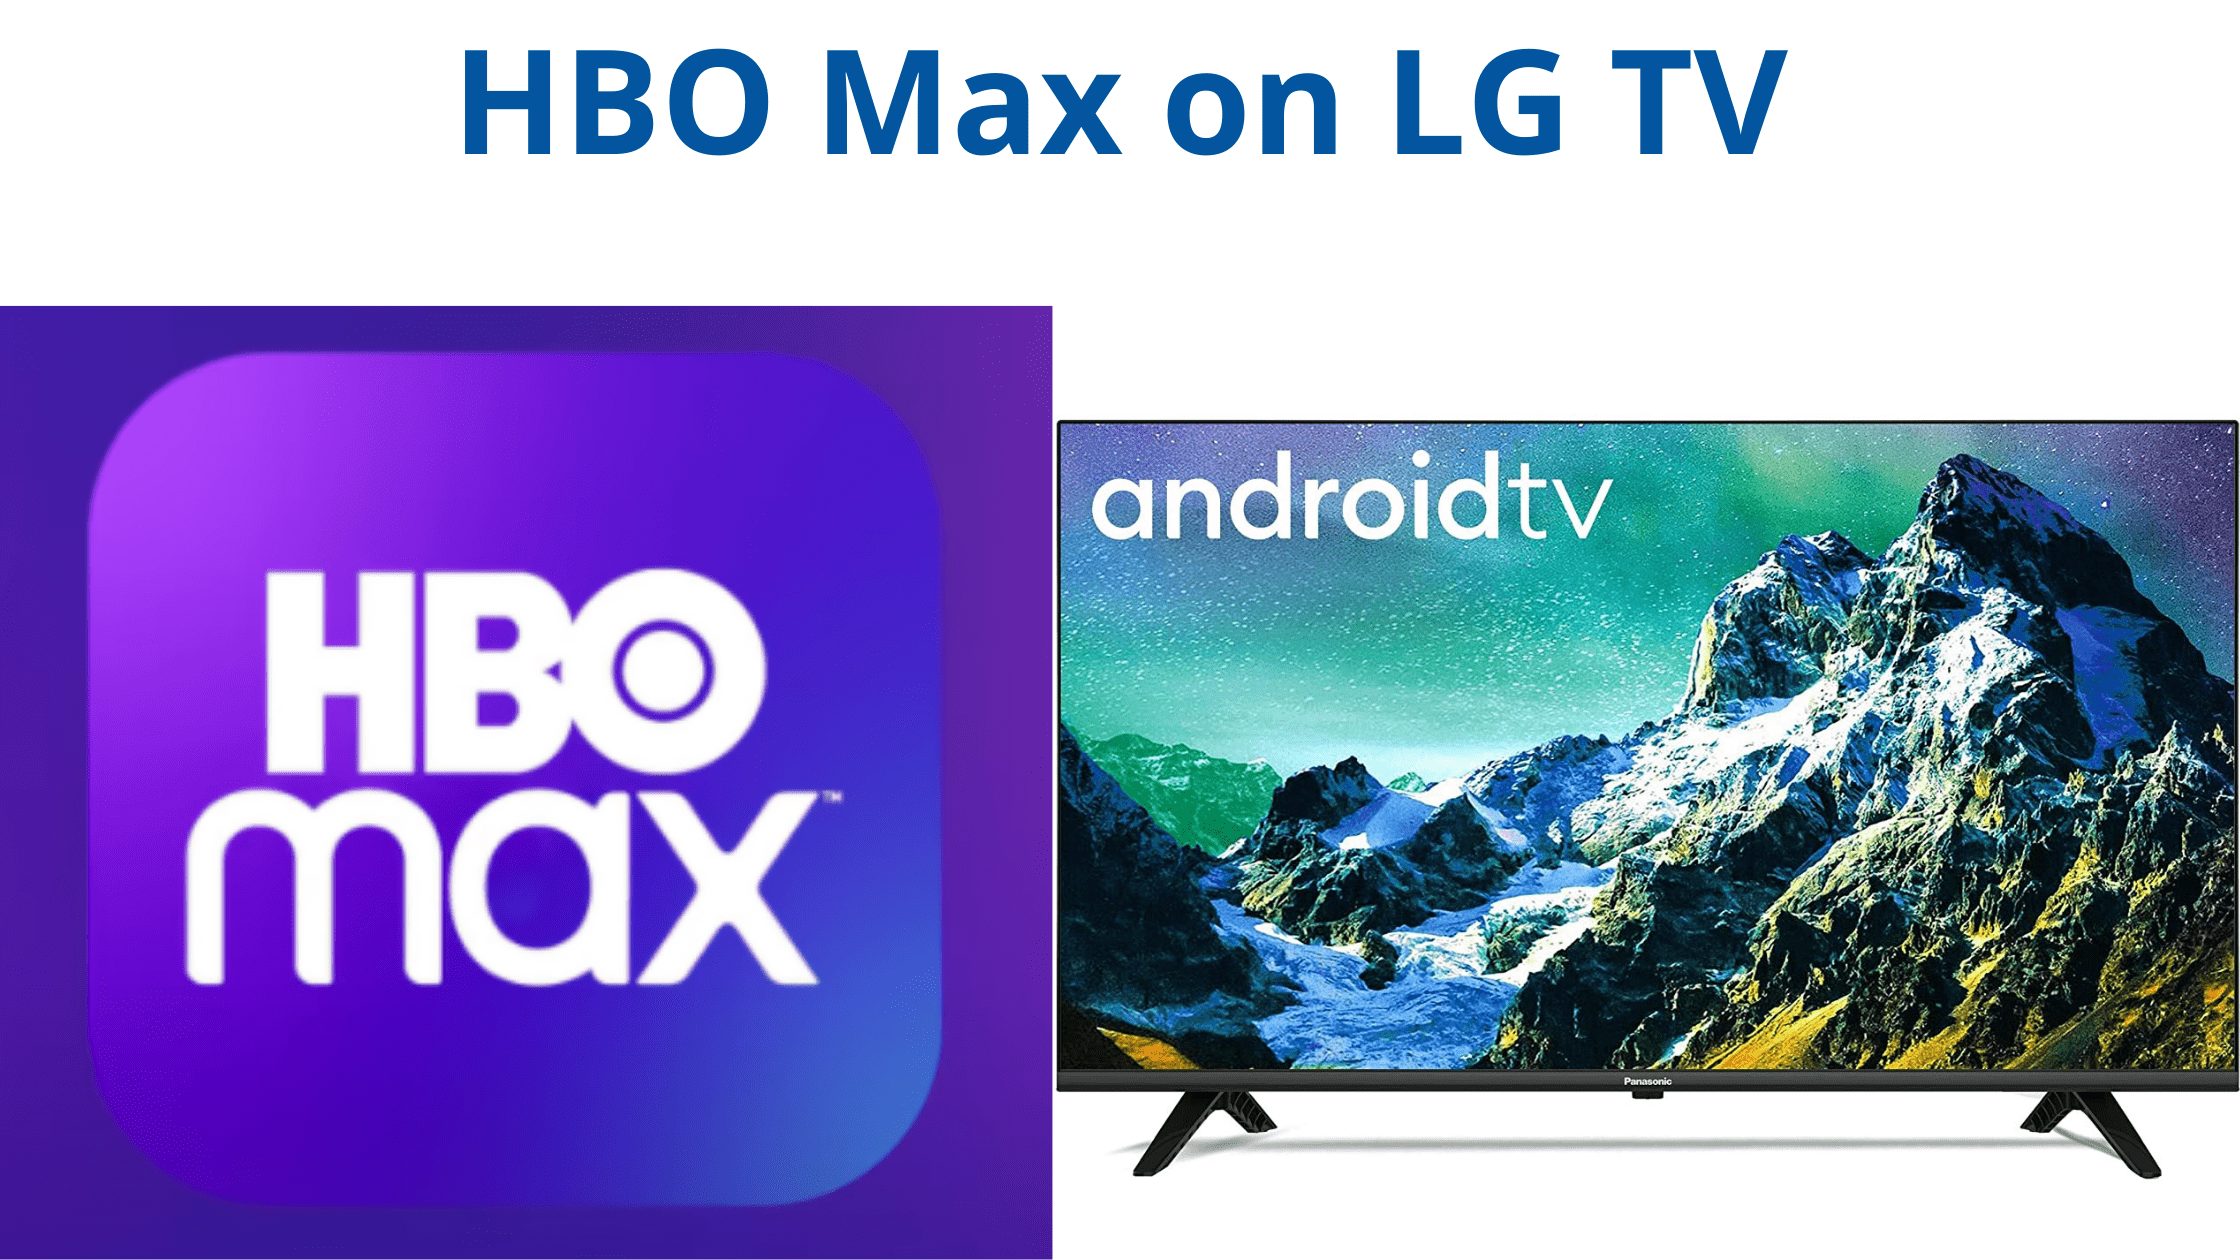 HBO Max on LG TV